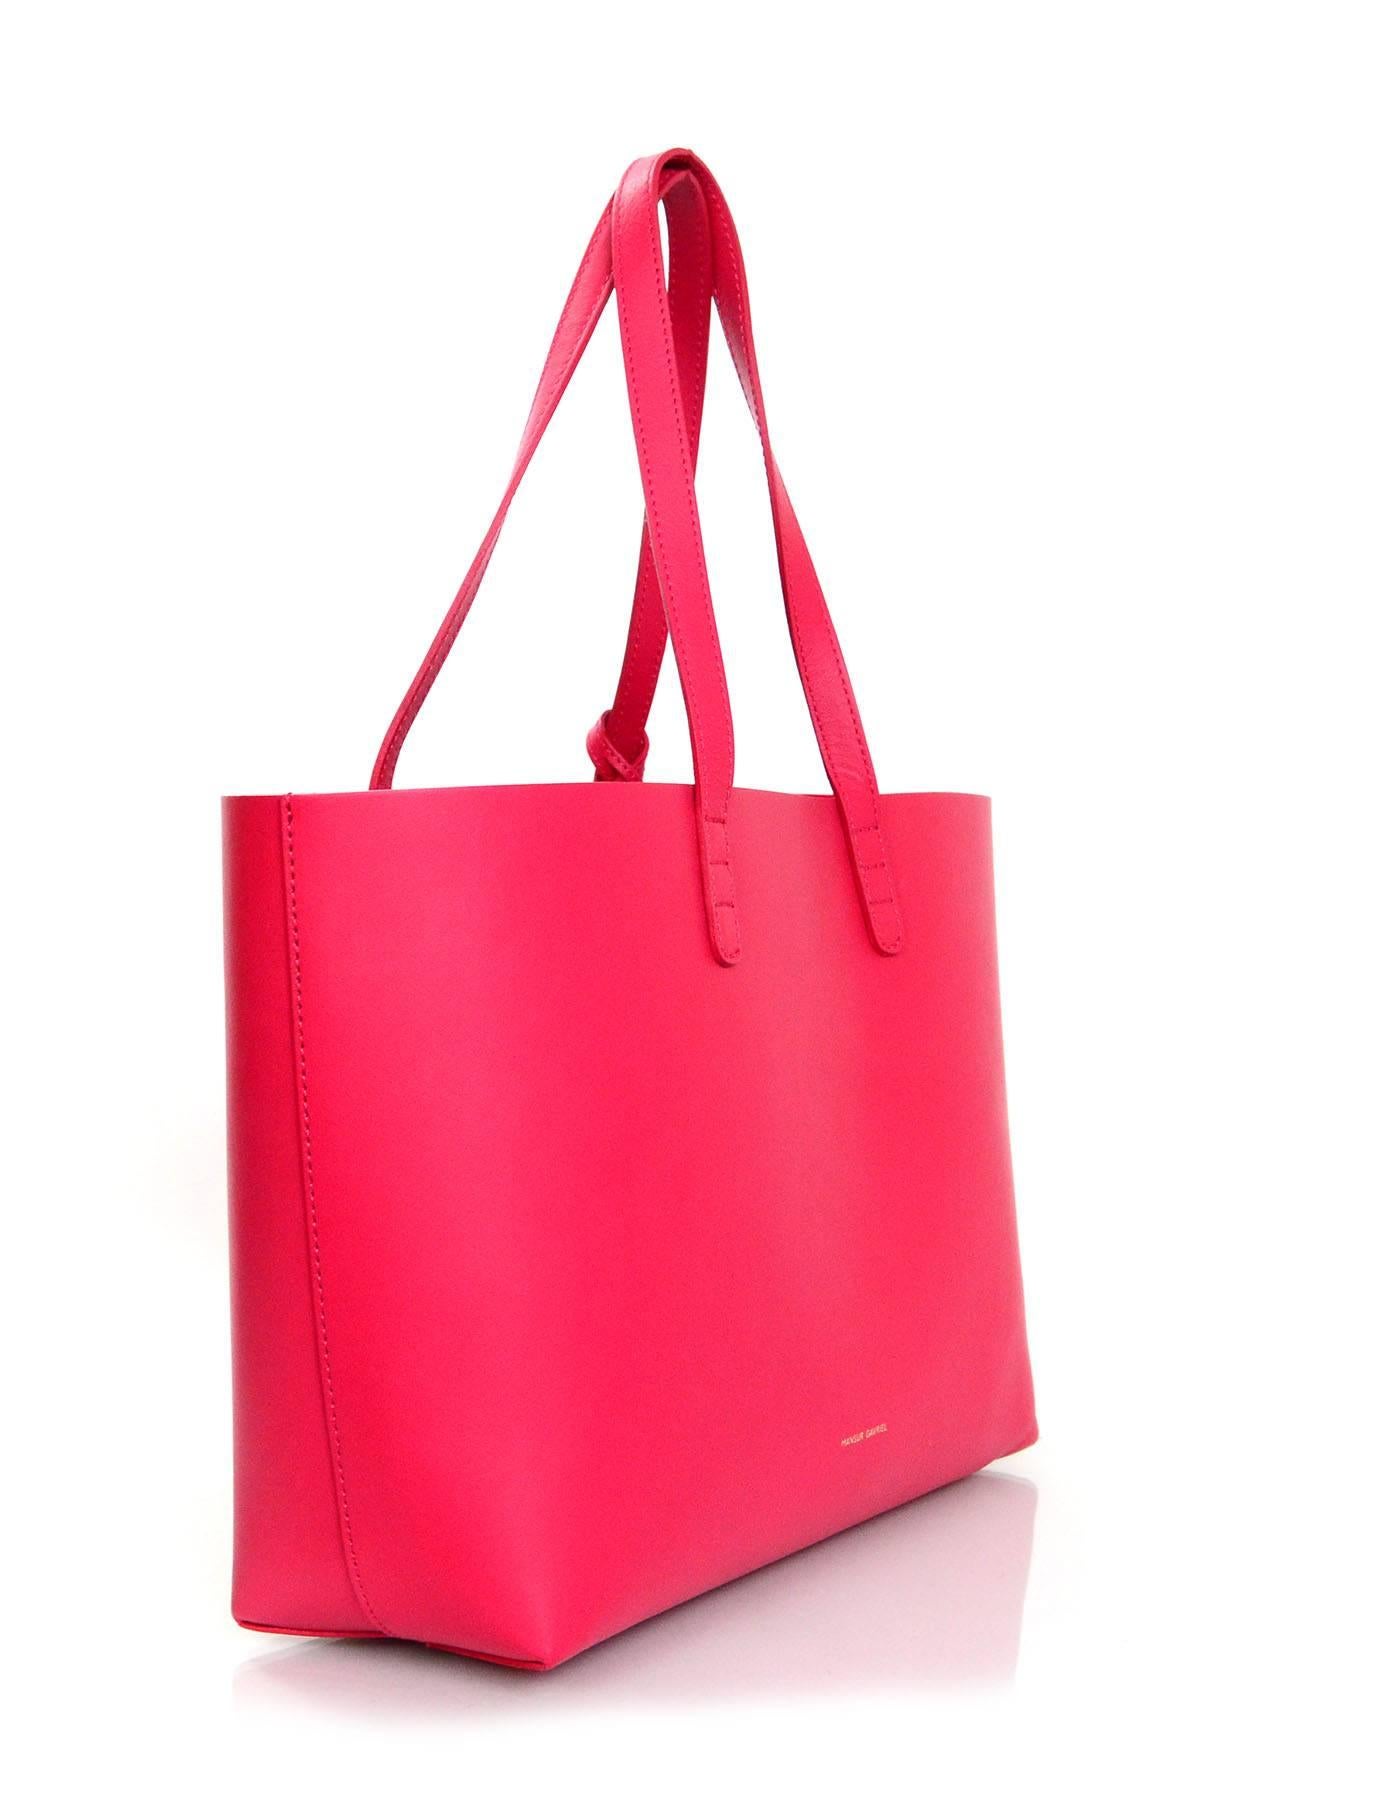 Mansur Gavriel Flama Red Calf Leather Small Tote 
Features matching red leather detachable insert

Made In: Italy
Color: Red
Hardware: Goldtone
Materials: Calf leather
Lining: Red calf leather
Closure/Opening: Open top
Exterior Pockets: